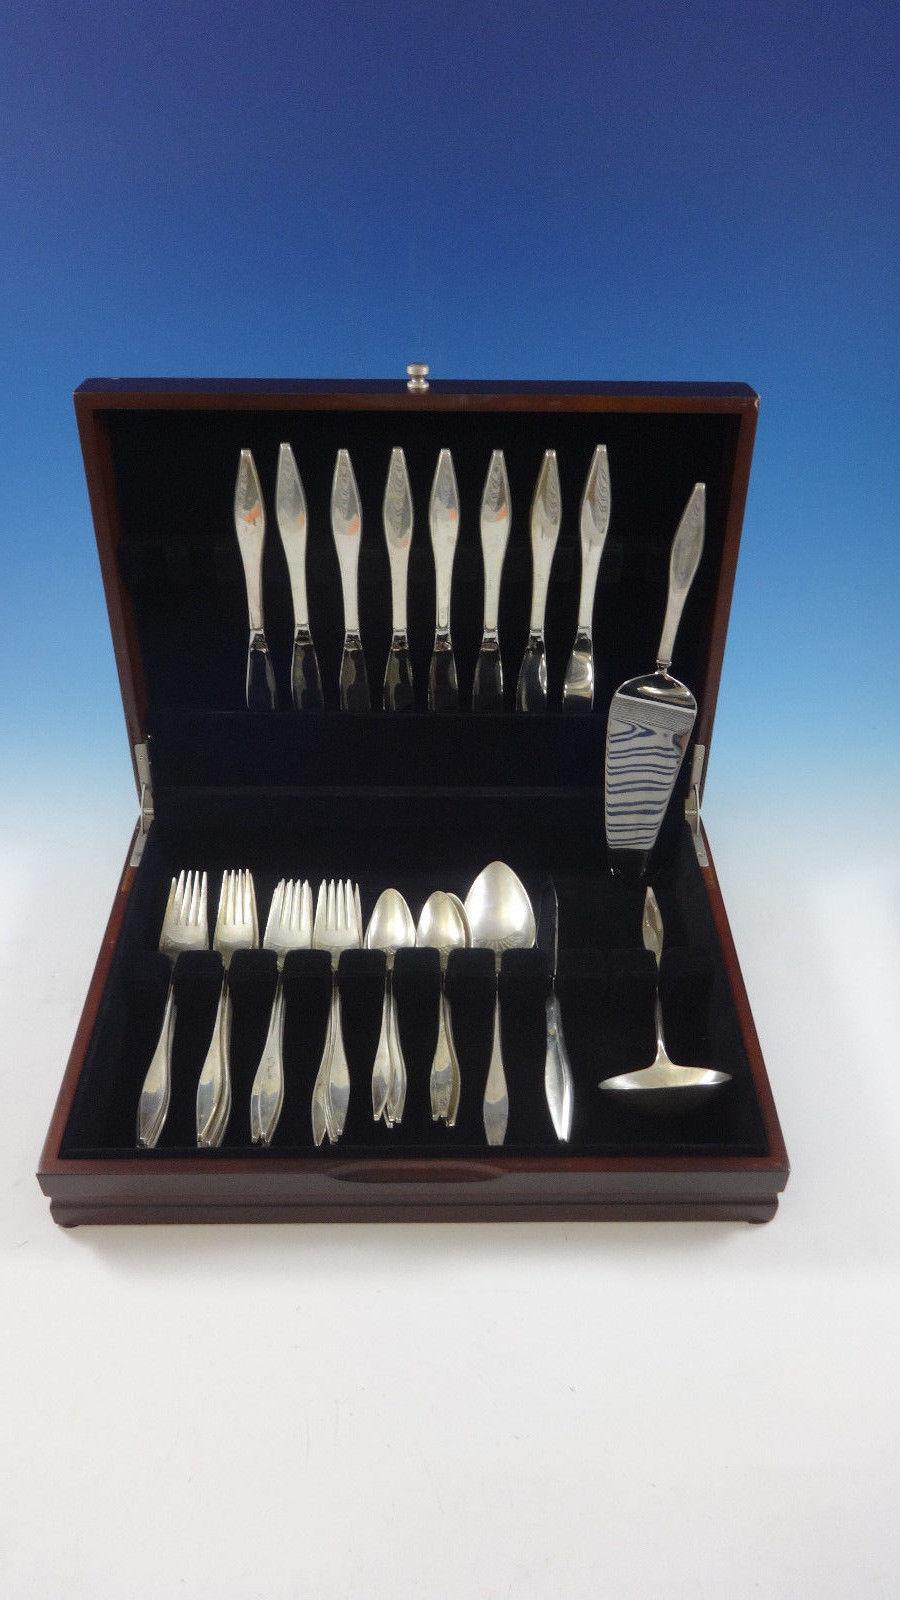 Mid-Century Modern Lark by Reed & Barton sterling silver Flatware set - 36 Pieces. Designed by John Prip. This set includes:

8 knives, 9